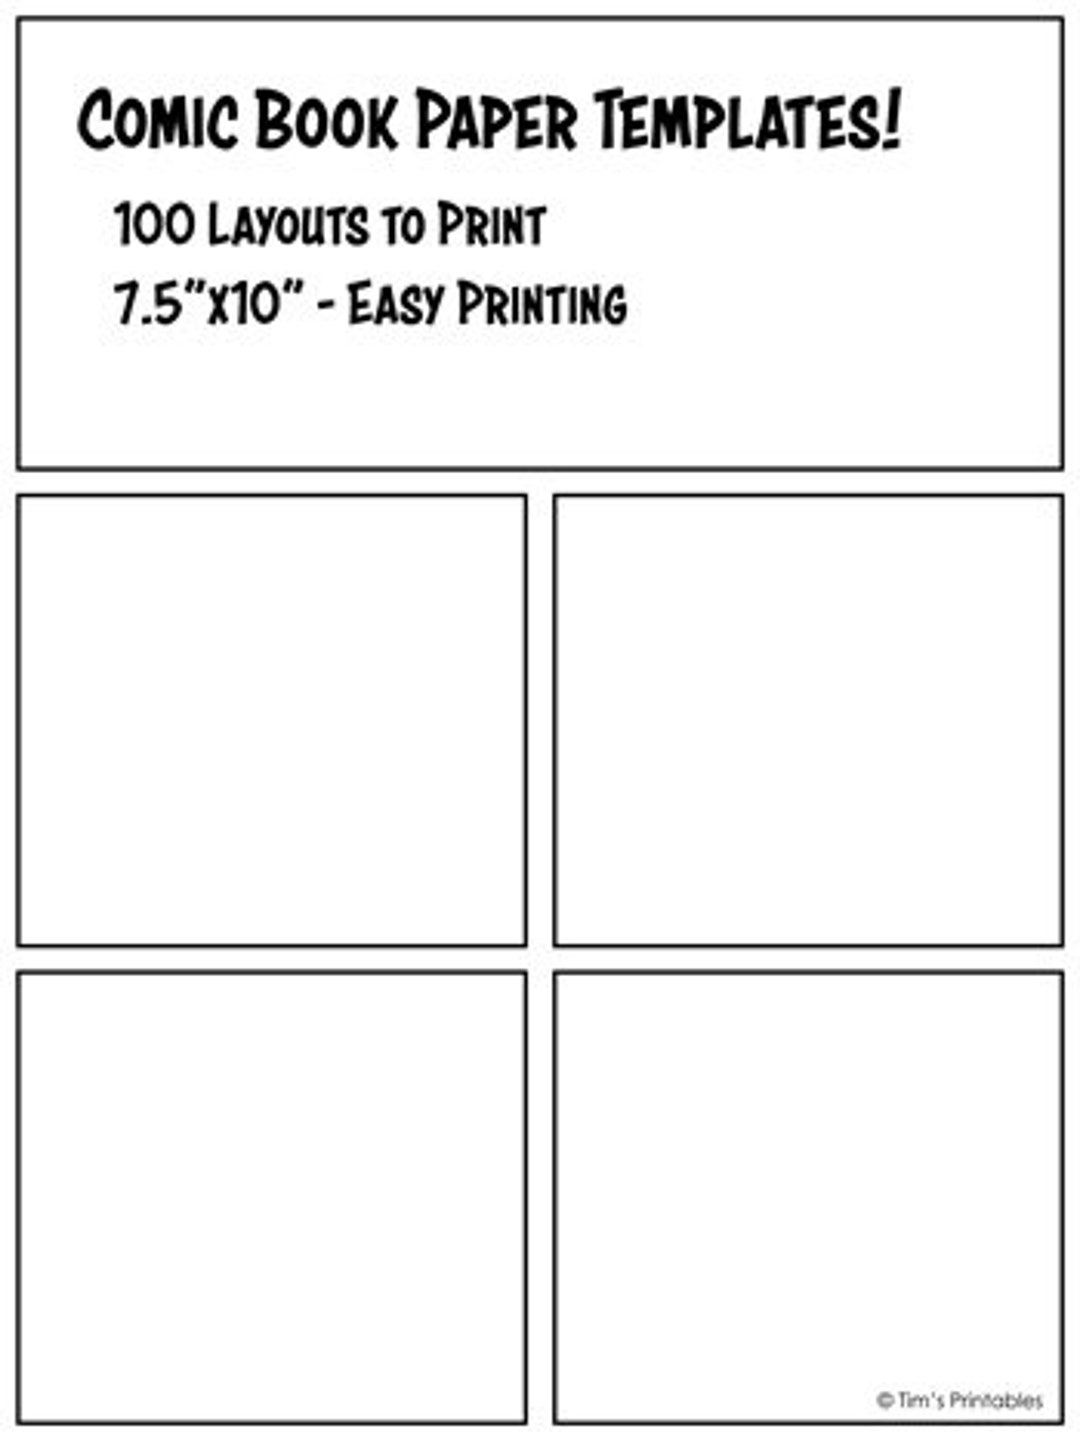 Comic Book Paper Templates - 100 Printable Layouts for Kids by Tim's  Printables